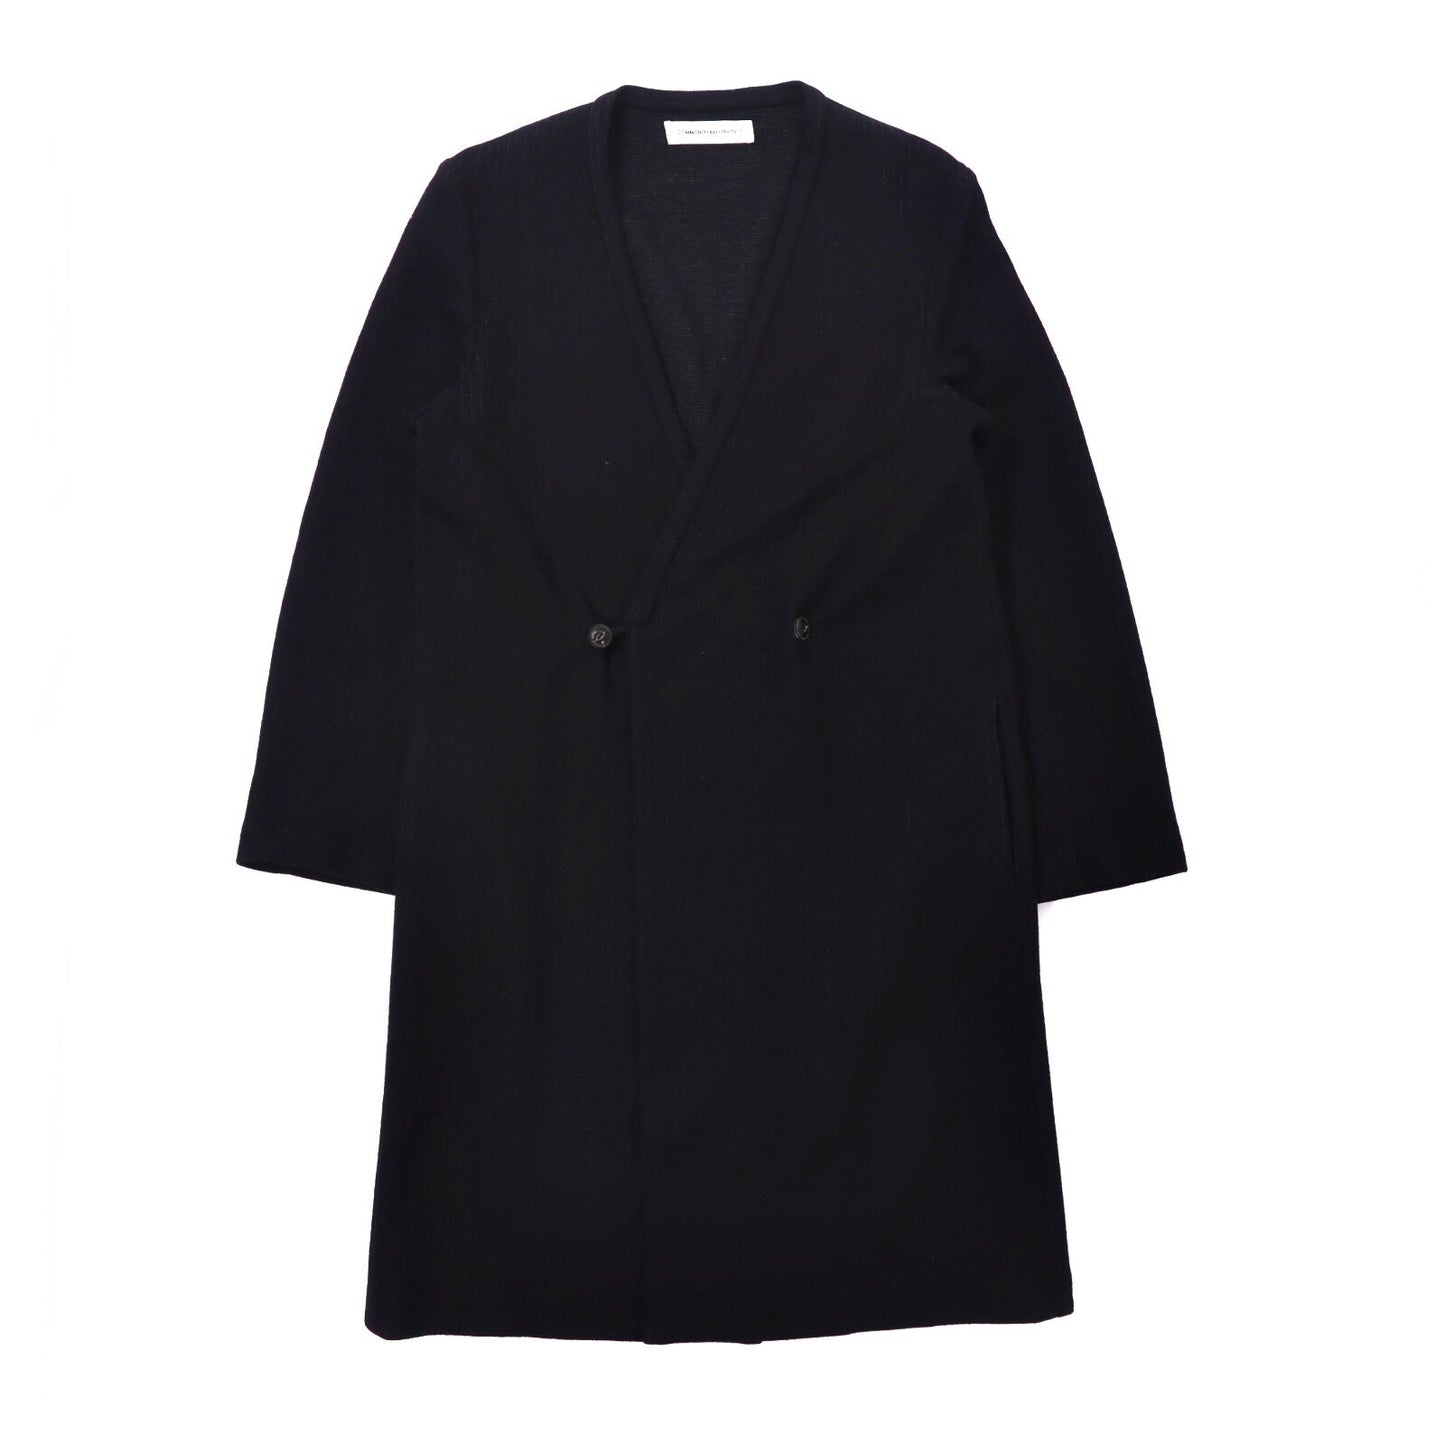 Commono Reproduct Double Chester coat 1 Navy Striped Wool Made in